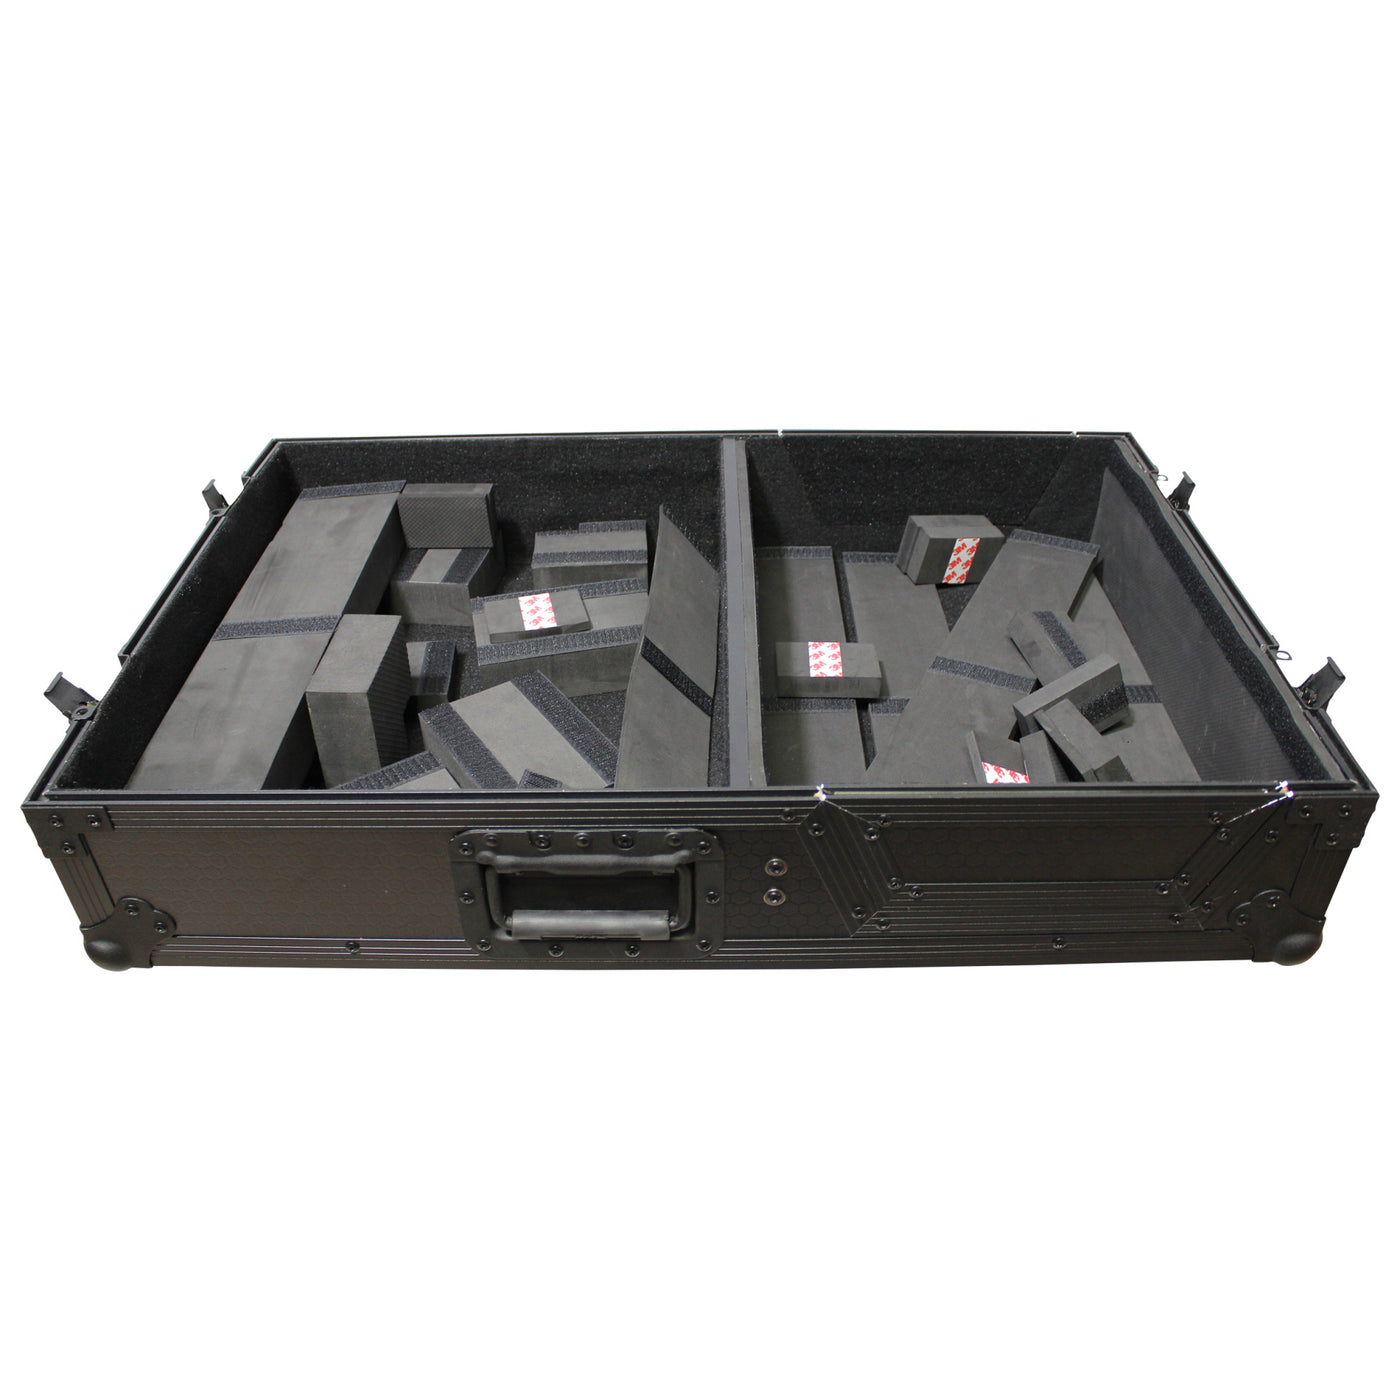 ProX XS-TMC1012WBL ATA-300 Style Flight Case, For Single Turntable in Battle Mode and 10" or 12" DJ Mixer, Pro Audio Equipment Storage, Black on Black